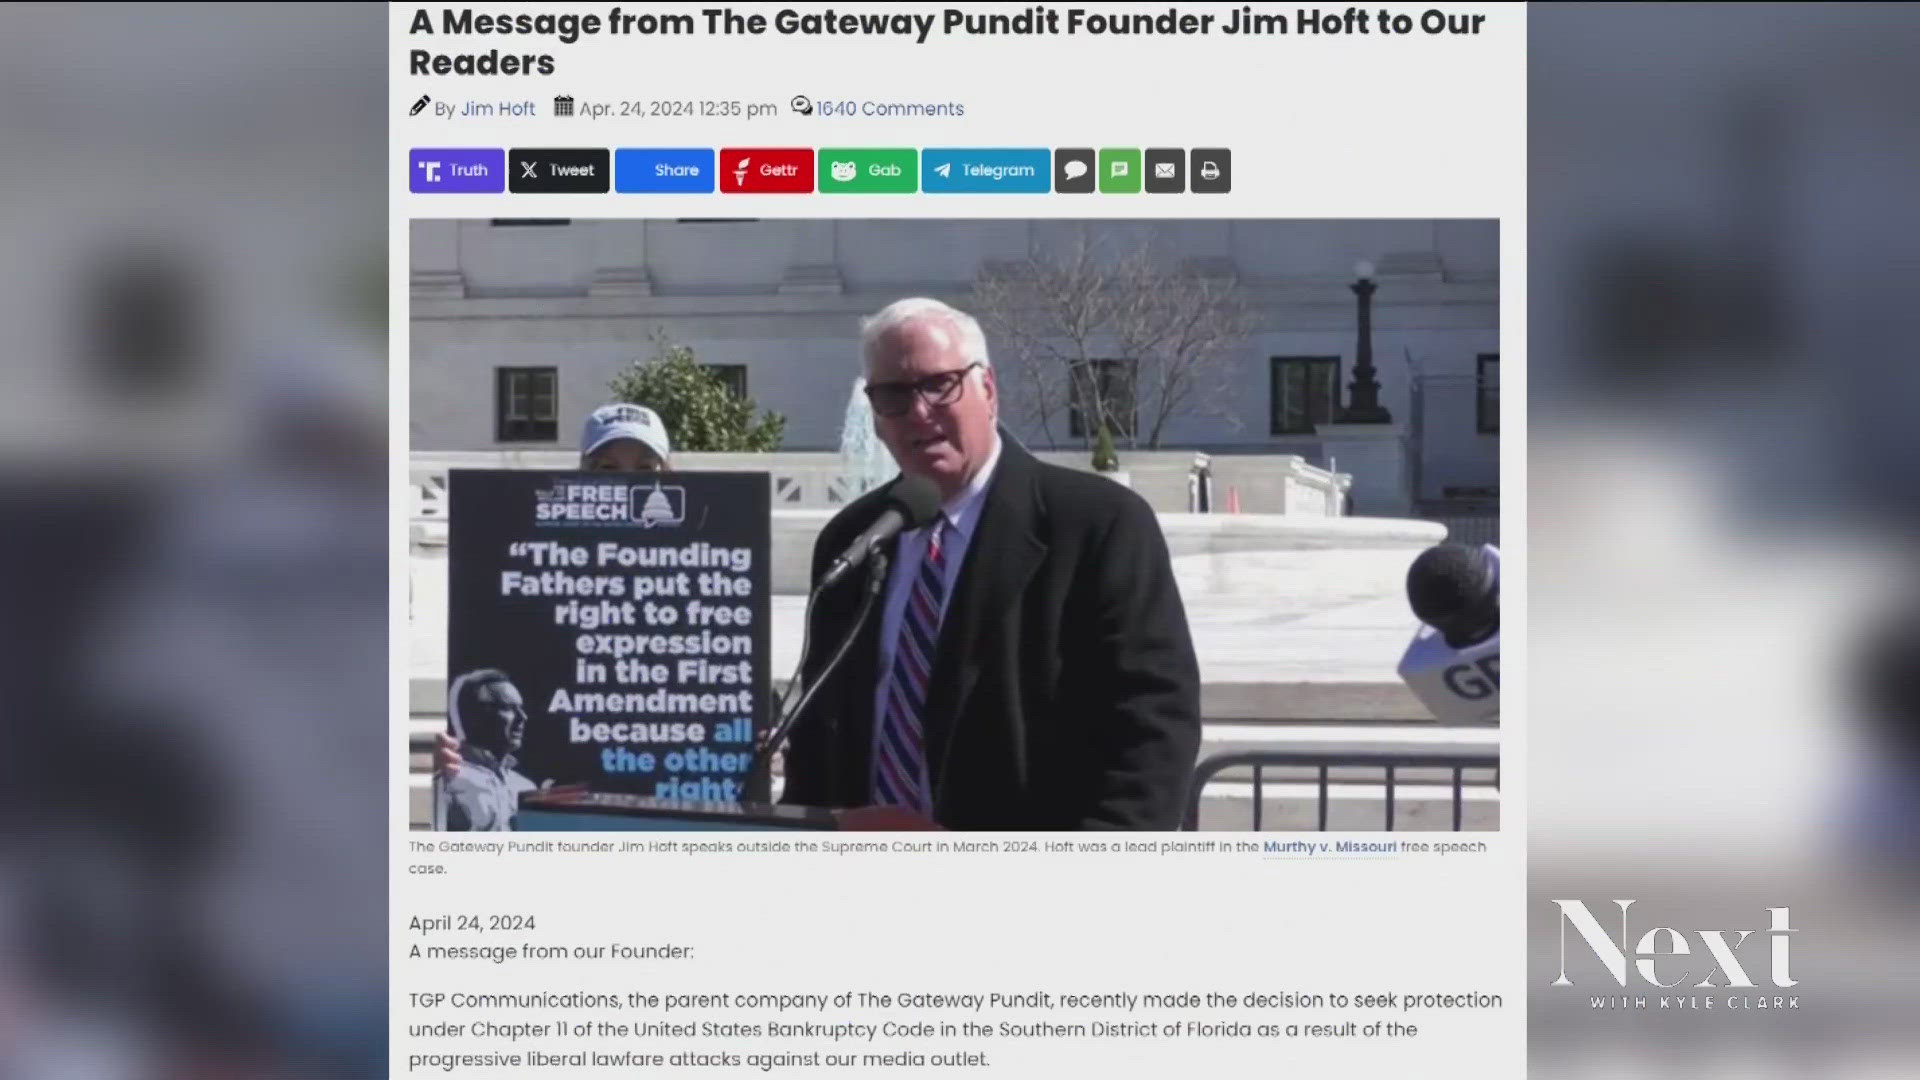 The Gateway Pundit blames "liberal lawfare attacks" and said it will use bankruptcy to "consolidate litigation" and continue its work.